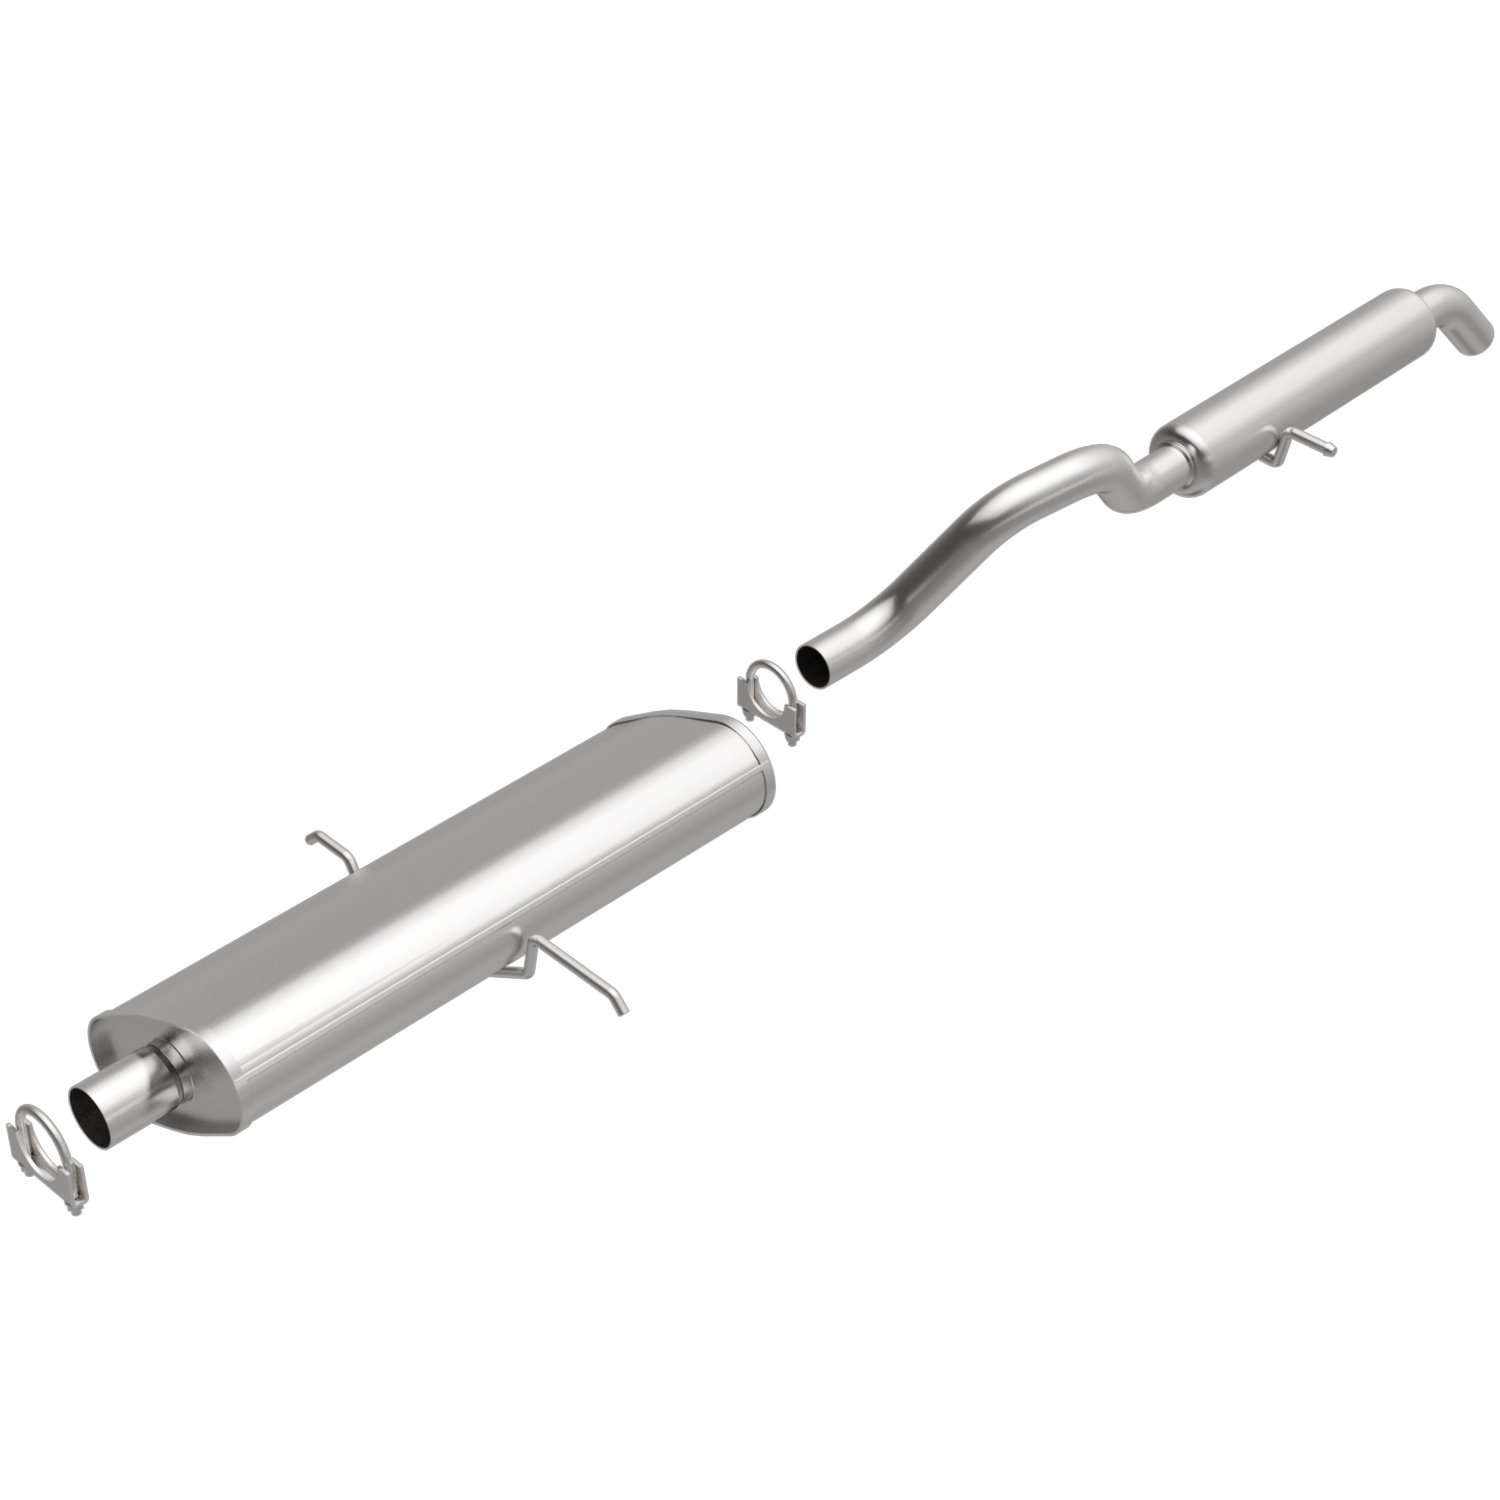 Direct-Fit Exhaust Kit, 2001-2007 Dodge Caravan, Voyager, Town & Country